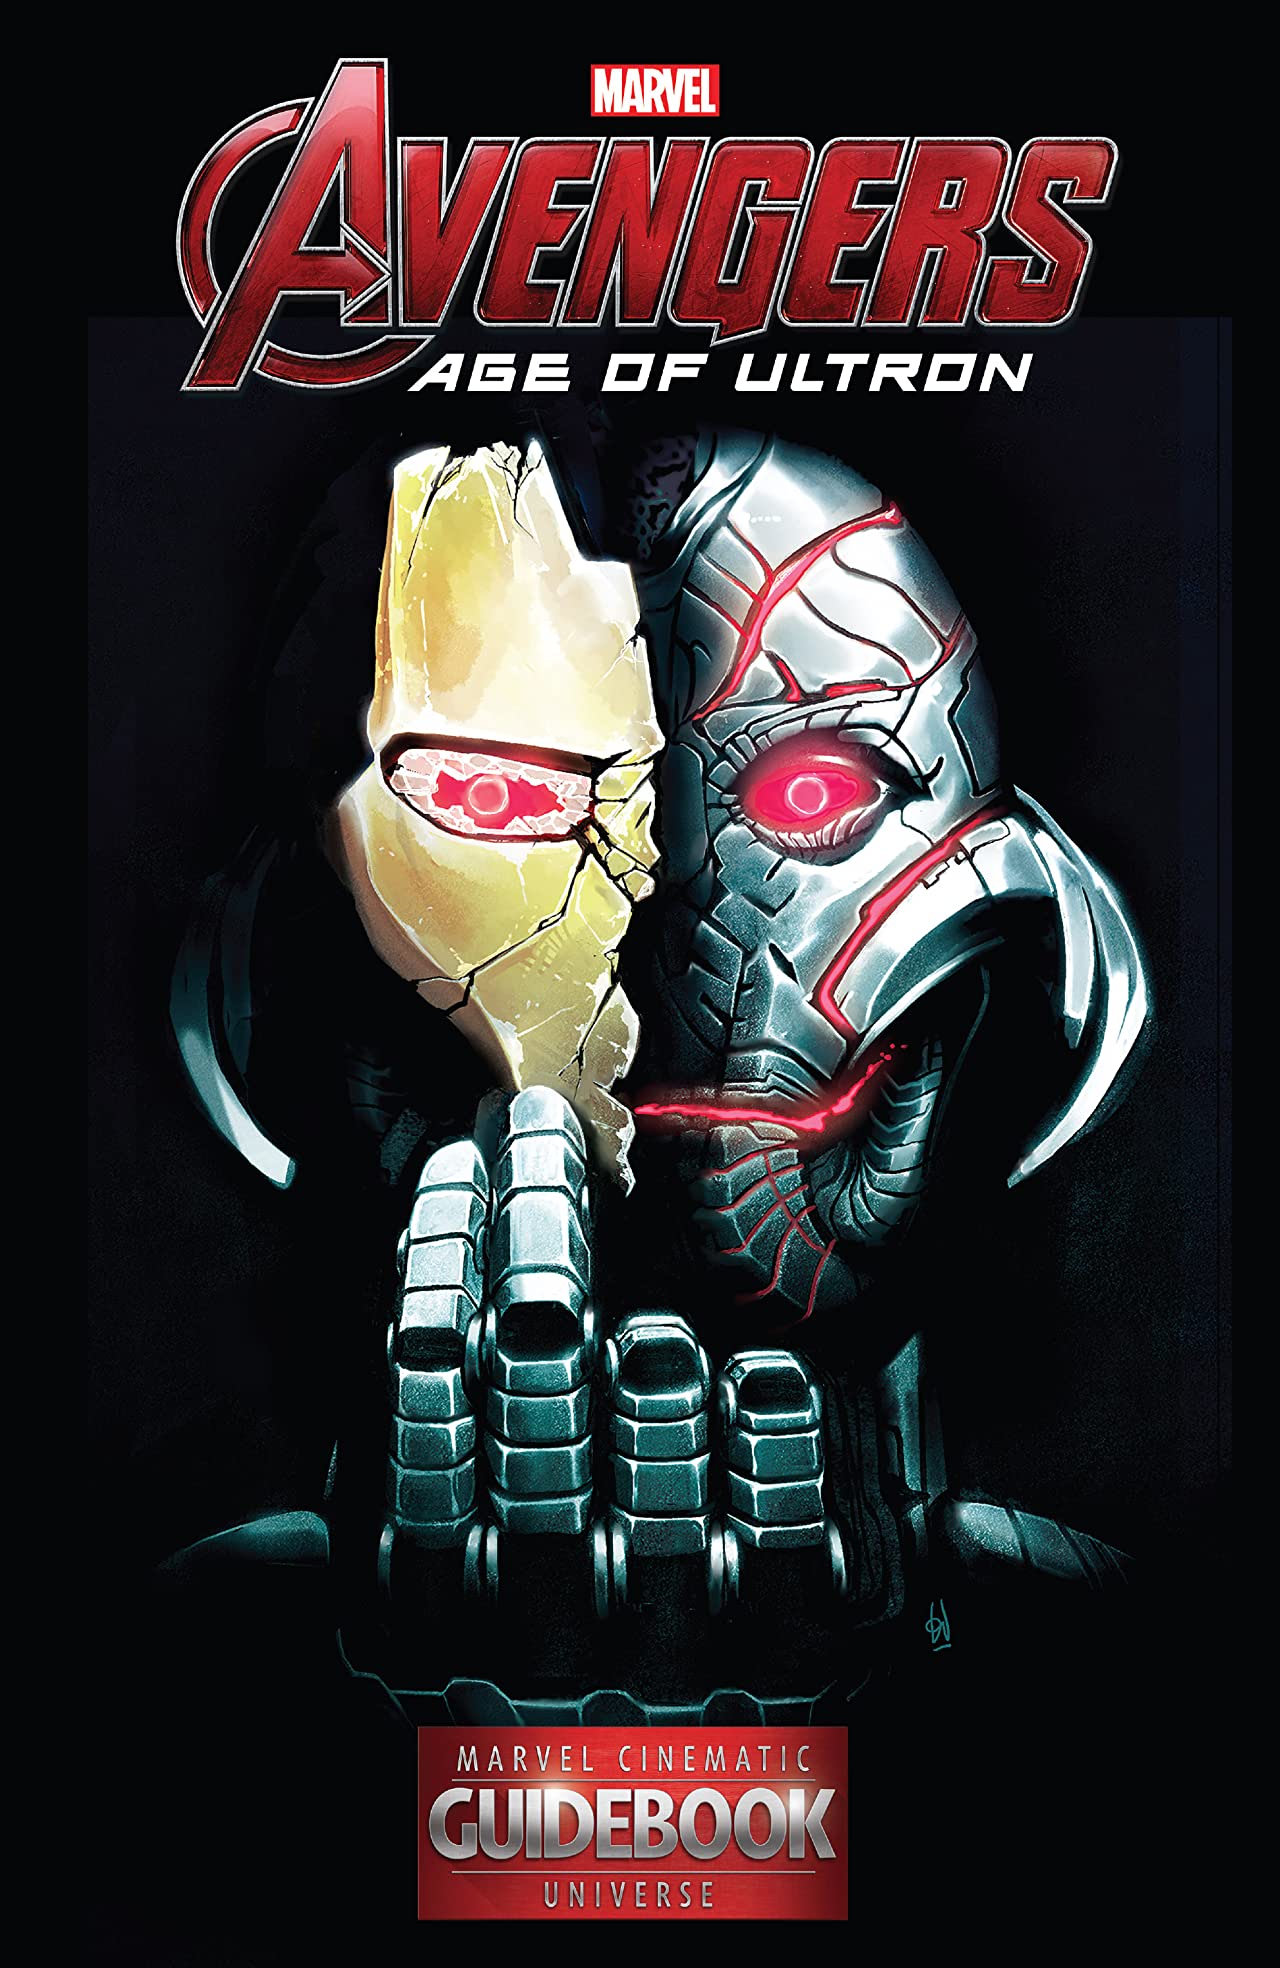 Guidebook to the Marvel Cinematic Universe's Avengers: Age Of Ultron